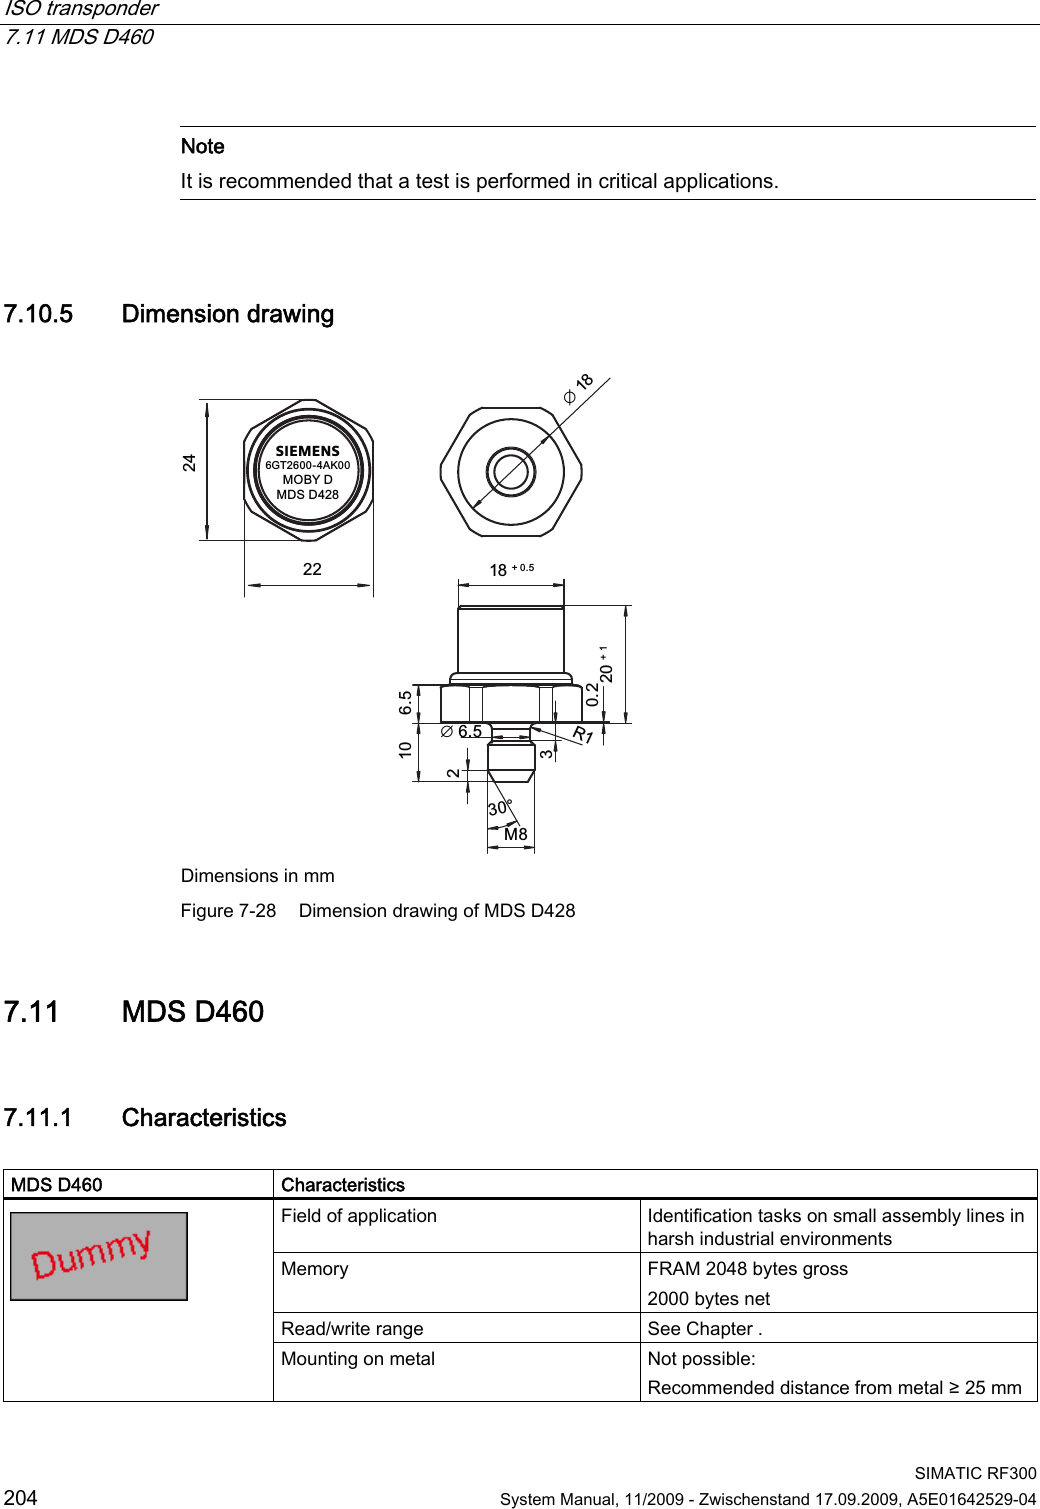 ISO transponder   7.11 MDS D460  SIMATIC RF300 204  System Manual, 11/2009 - Zwischenstand 17.09.2009, A5E01642529-04   Note It is recommended that a test is performed in critical applications.  7.10.5 Dimension drawing SIEMENS*7$.02%&lt;&apos;0&apos;6&apos;0rෘ 5ෘ Dimensions in mm Figure 7-28  Dimension drawing of MDS D428 7.11 MDS D460 7.11.1 Characteristics  MDS D460  Characteristics Field of application  Identification tasks on small assembly lines in harsh industrial environments Memory  FRAM 2048 bytes gross 2000 bytes net Read/write range  See Chapter .  Mounting on metal  Not possible:  Recommended distance from metal ≥ 25 mm 